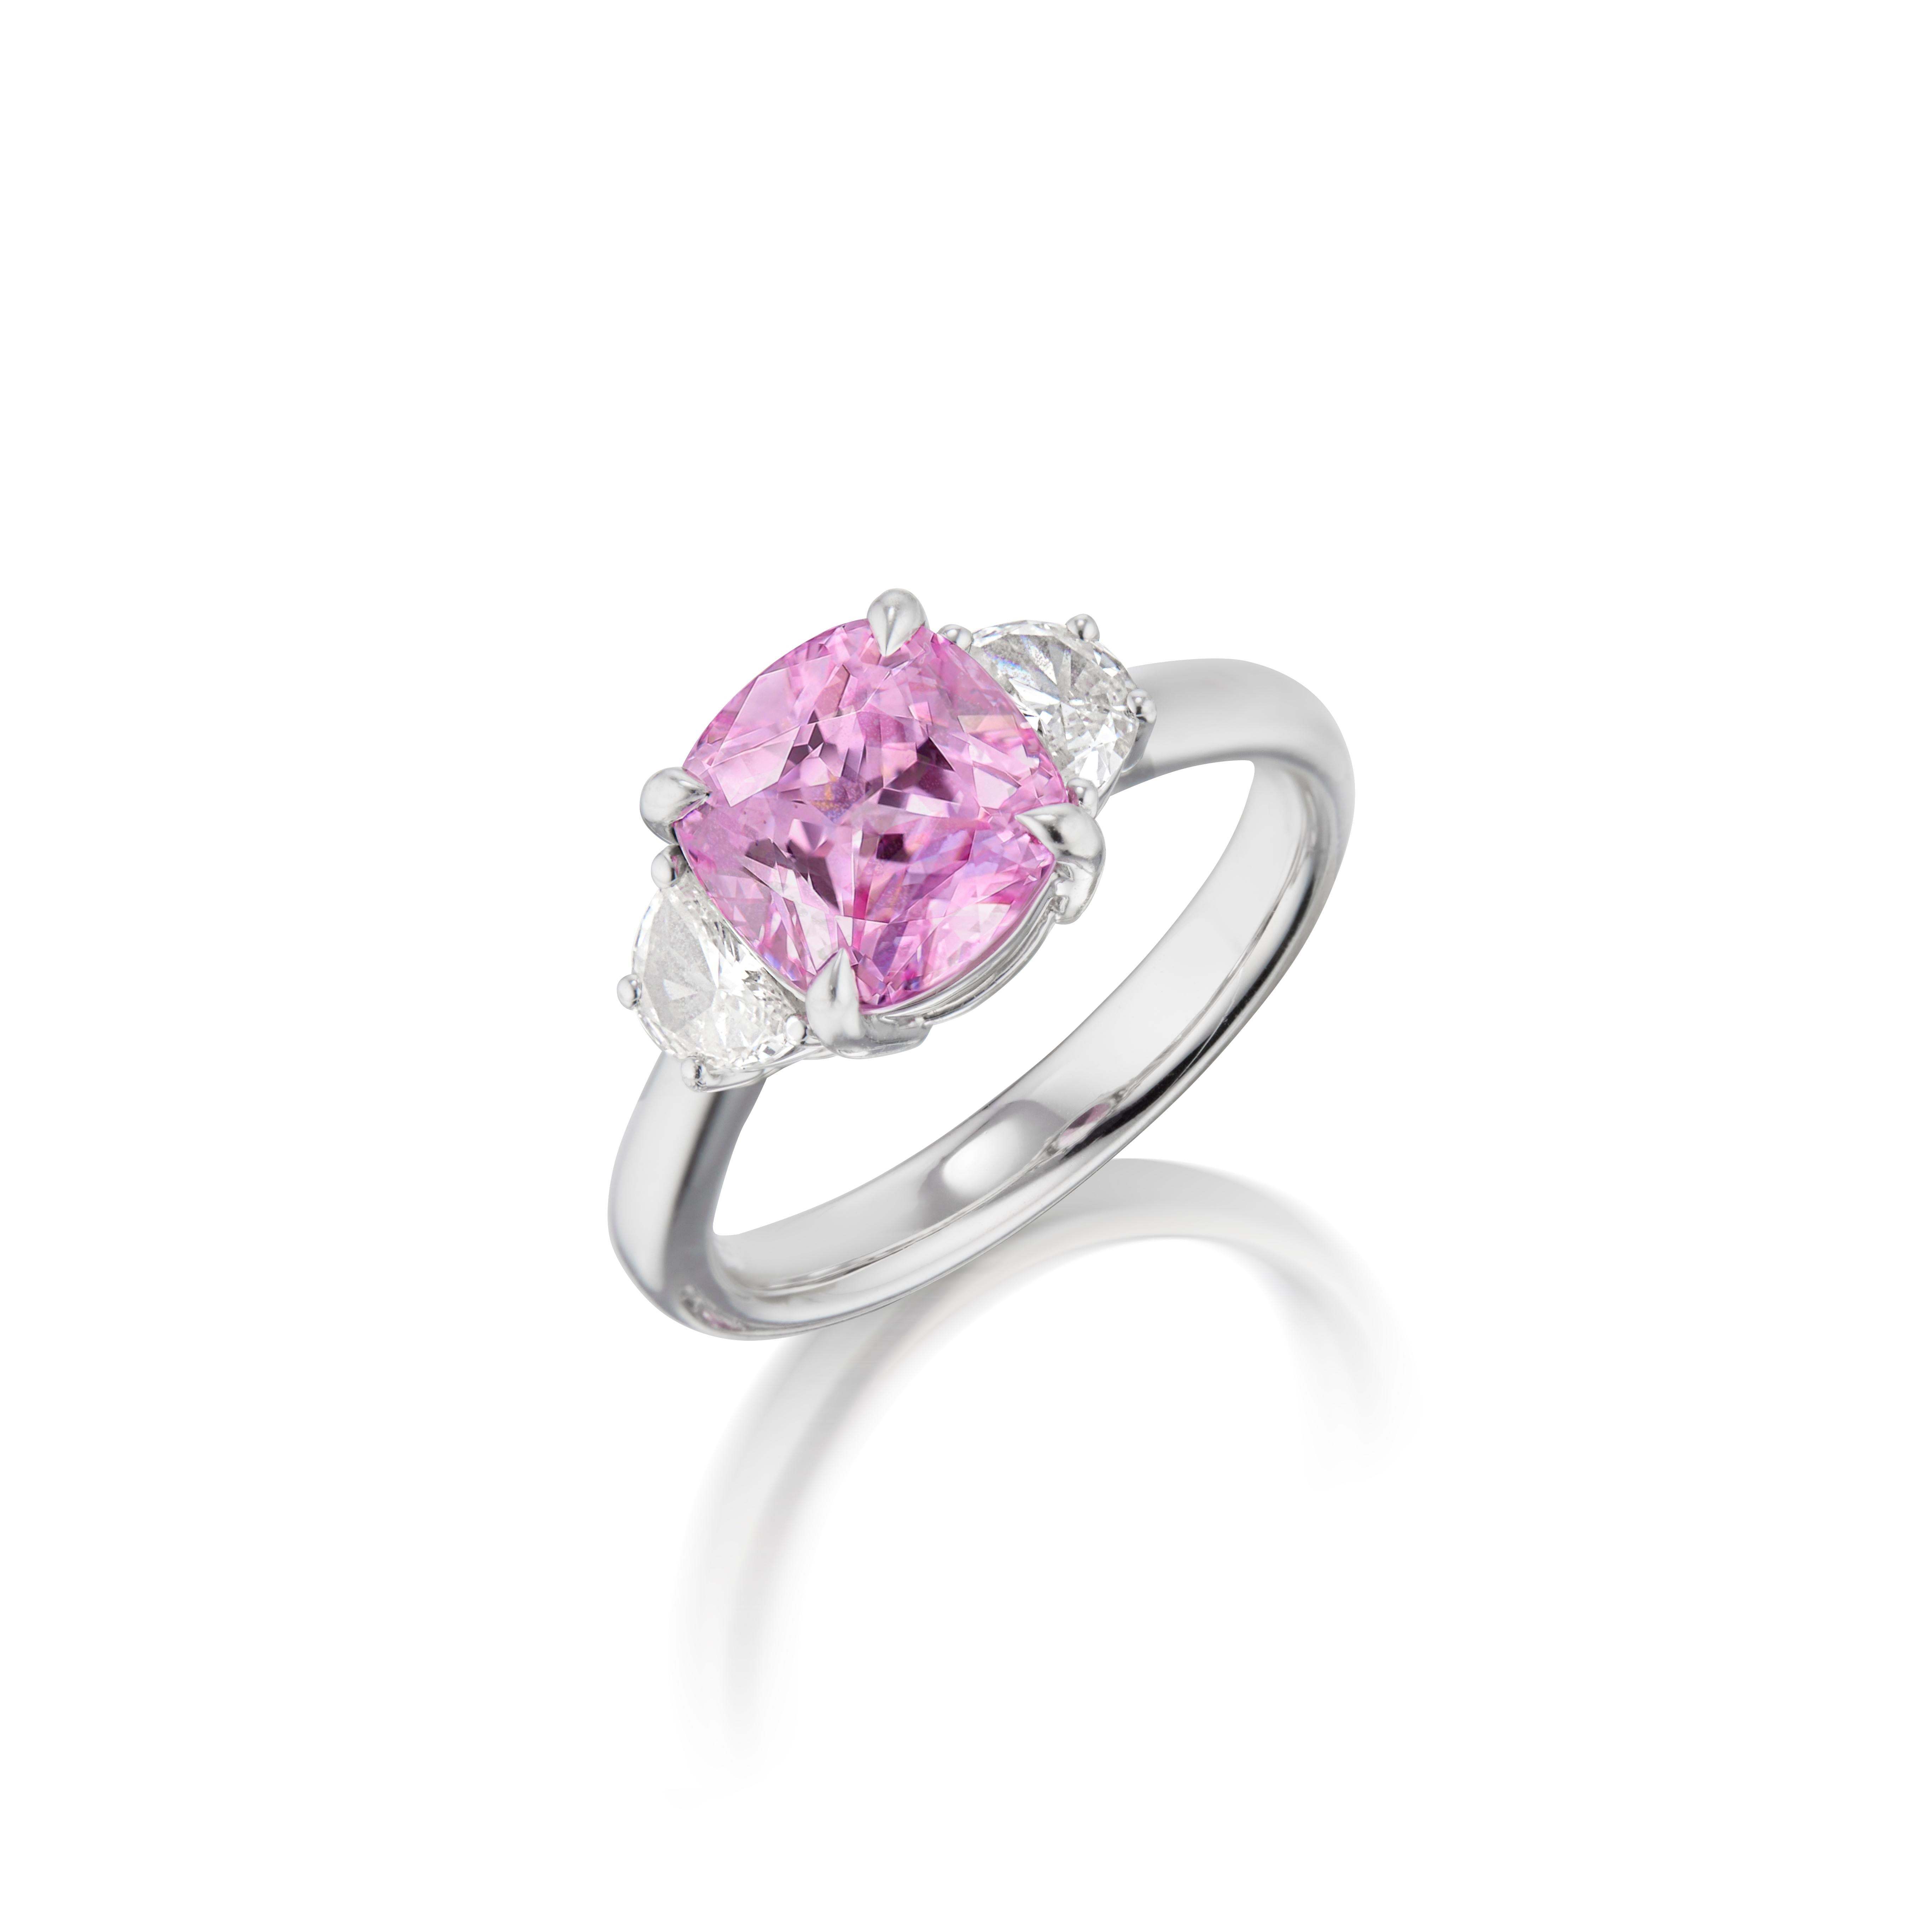 18K WHITE GOLD 
2 DIAMONDS  0.29 CARATS
1 NO-HEAT PINK BURMESE SAPPHIRE  3.063 CARATS
SSEF LAB CERTIFIED

Introducing our exquisite Ethereal Blush Burmese Pink Sapphire Ring, a true testament to timeless elegance and exceptional craftsmanship. This